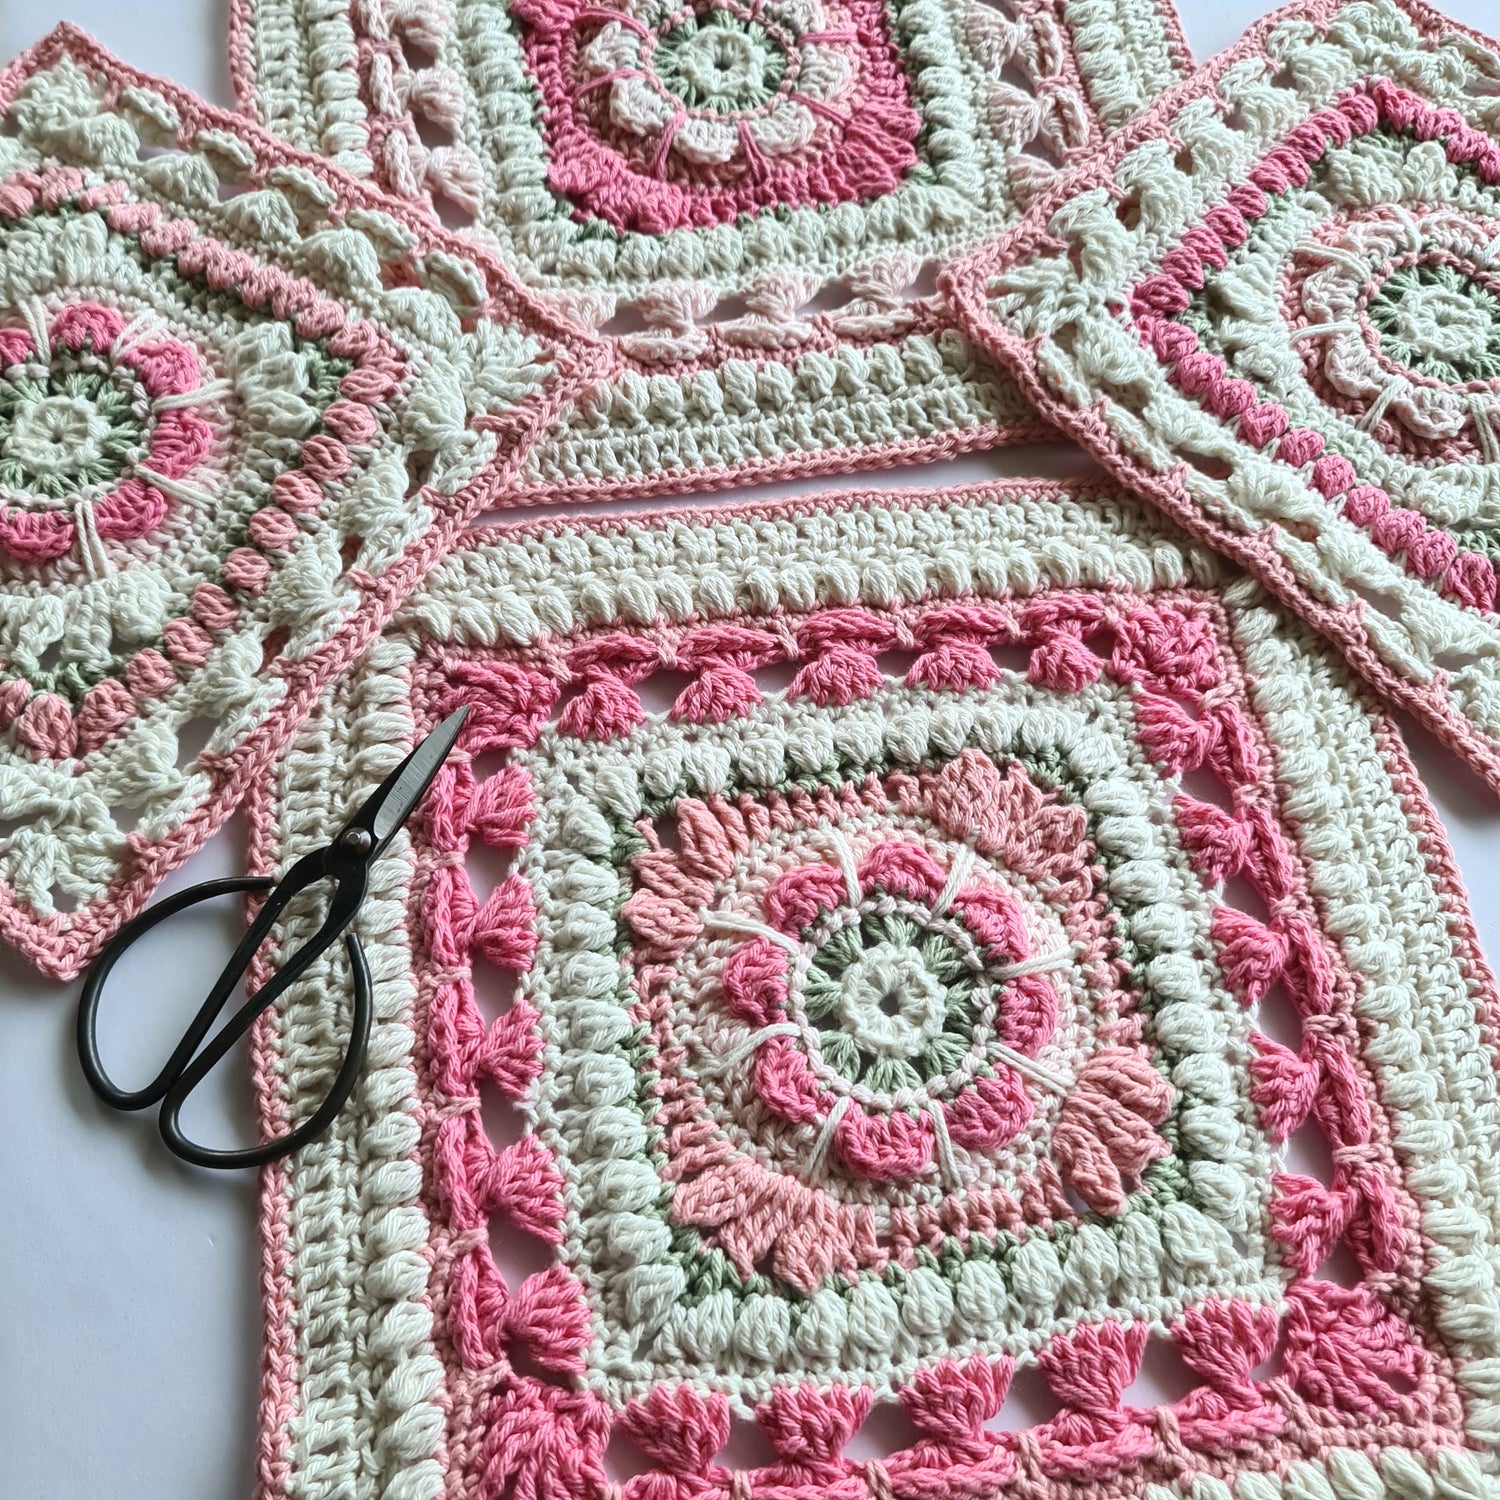 Pink and cream granny squares from Persnickety Blanket crochet pattern by Shelley Husband